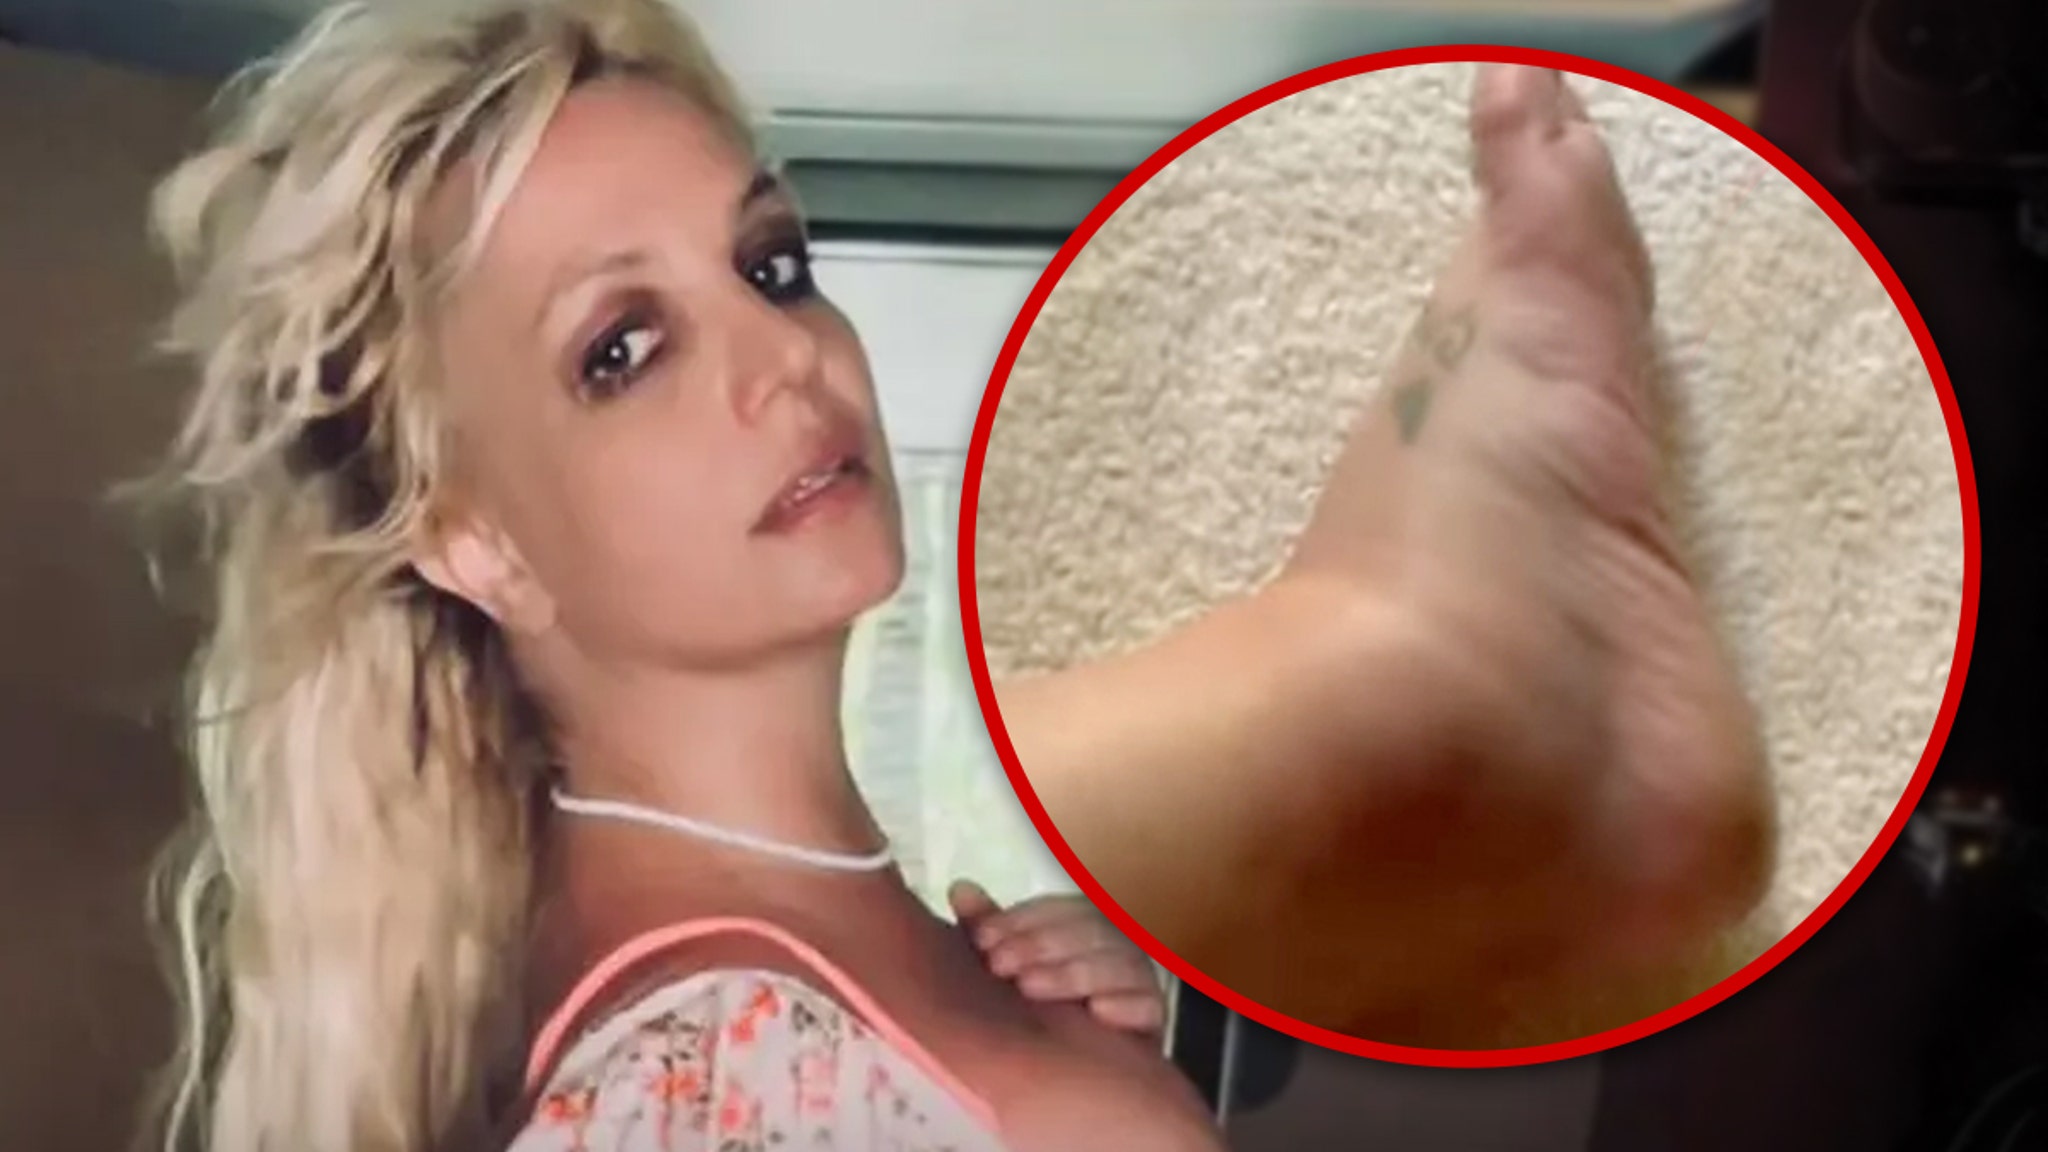 Britney Spears Shows Off Swollen Ankle After Hotel Incident